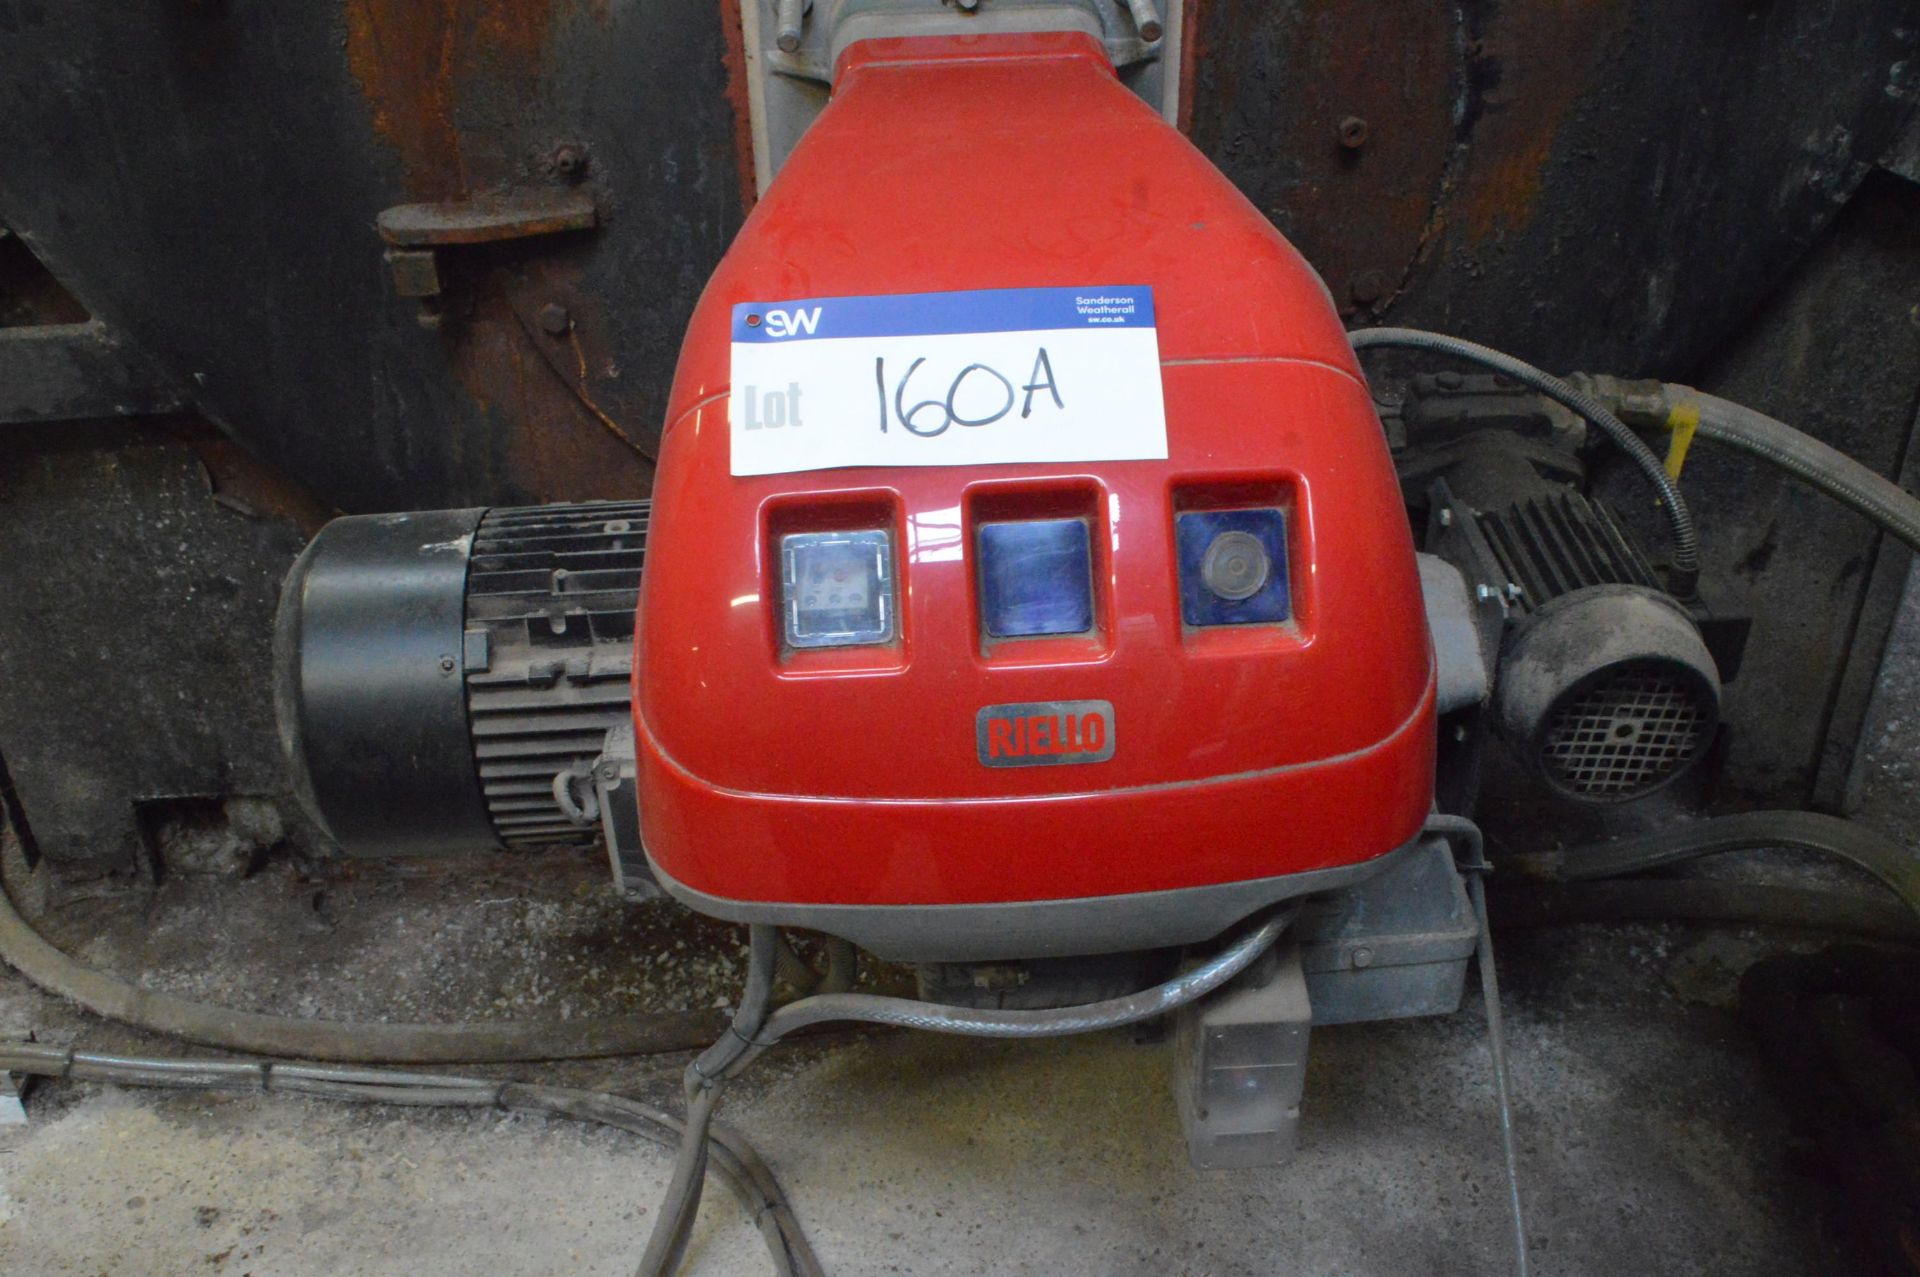 Riello RL 250 MZ OIL FIRED BURNER, serial no. 02396005032 (understood to be installed new in - Image 2 of 4